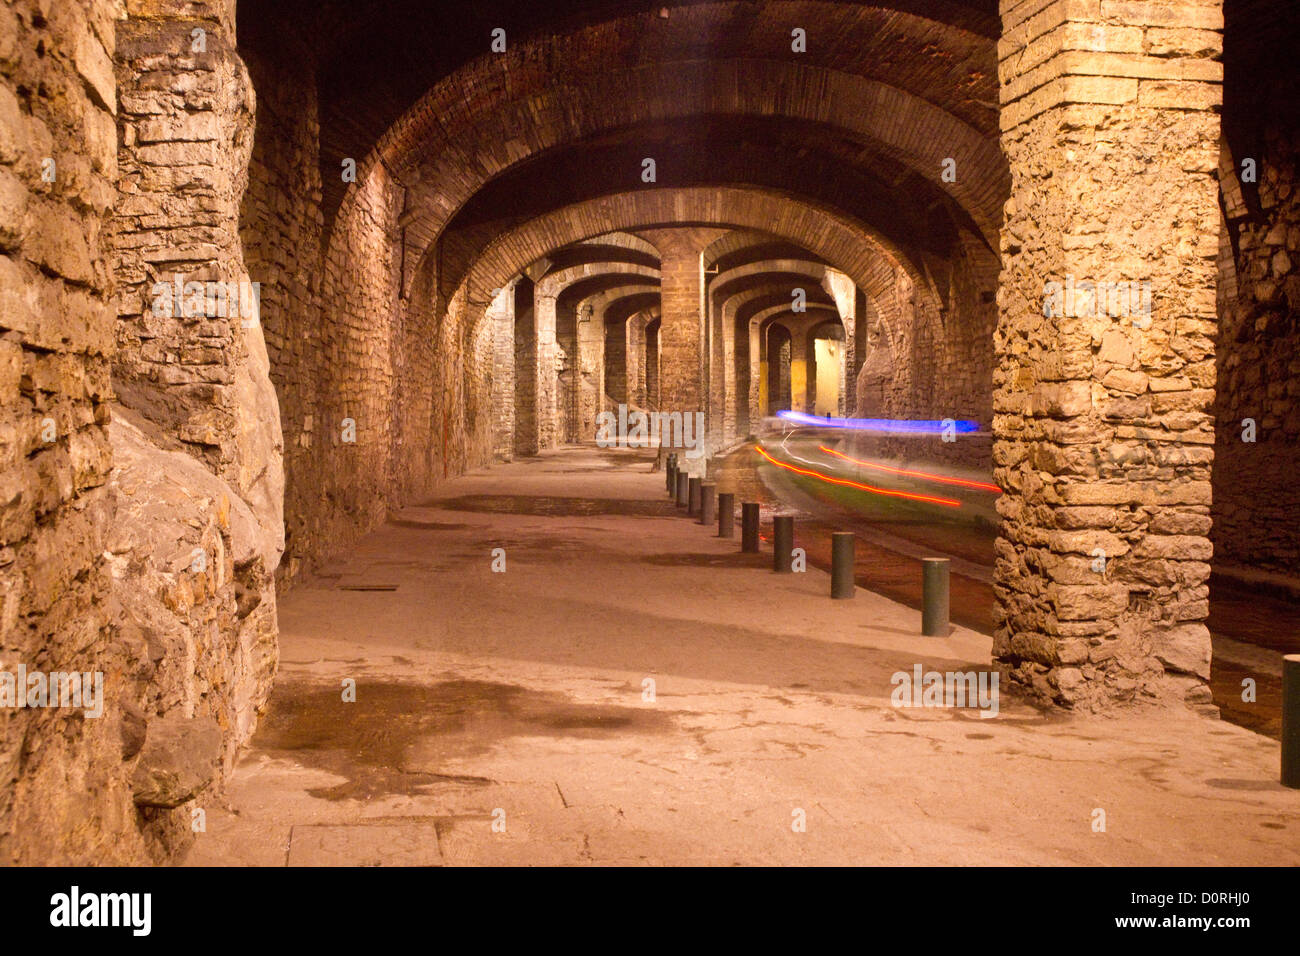 Invisible cars in Subterranean Roadway Stock Photo